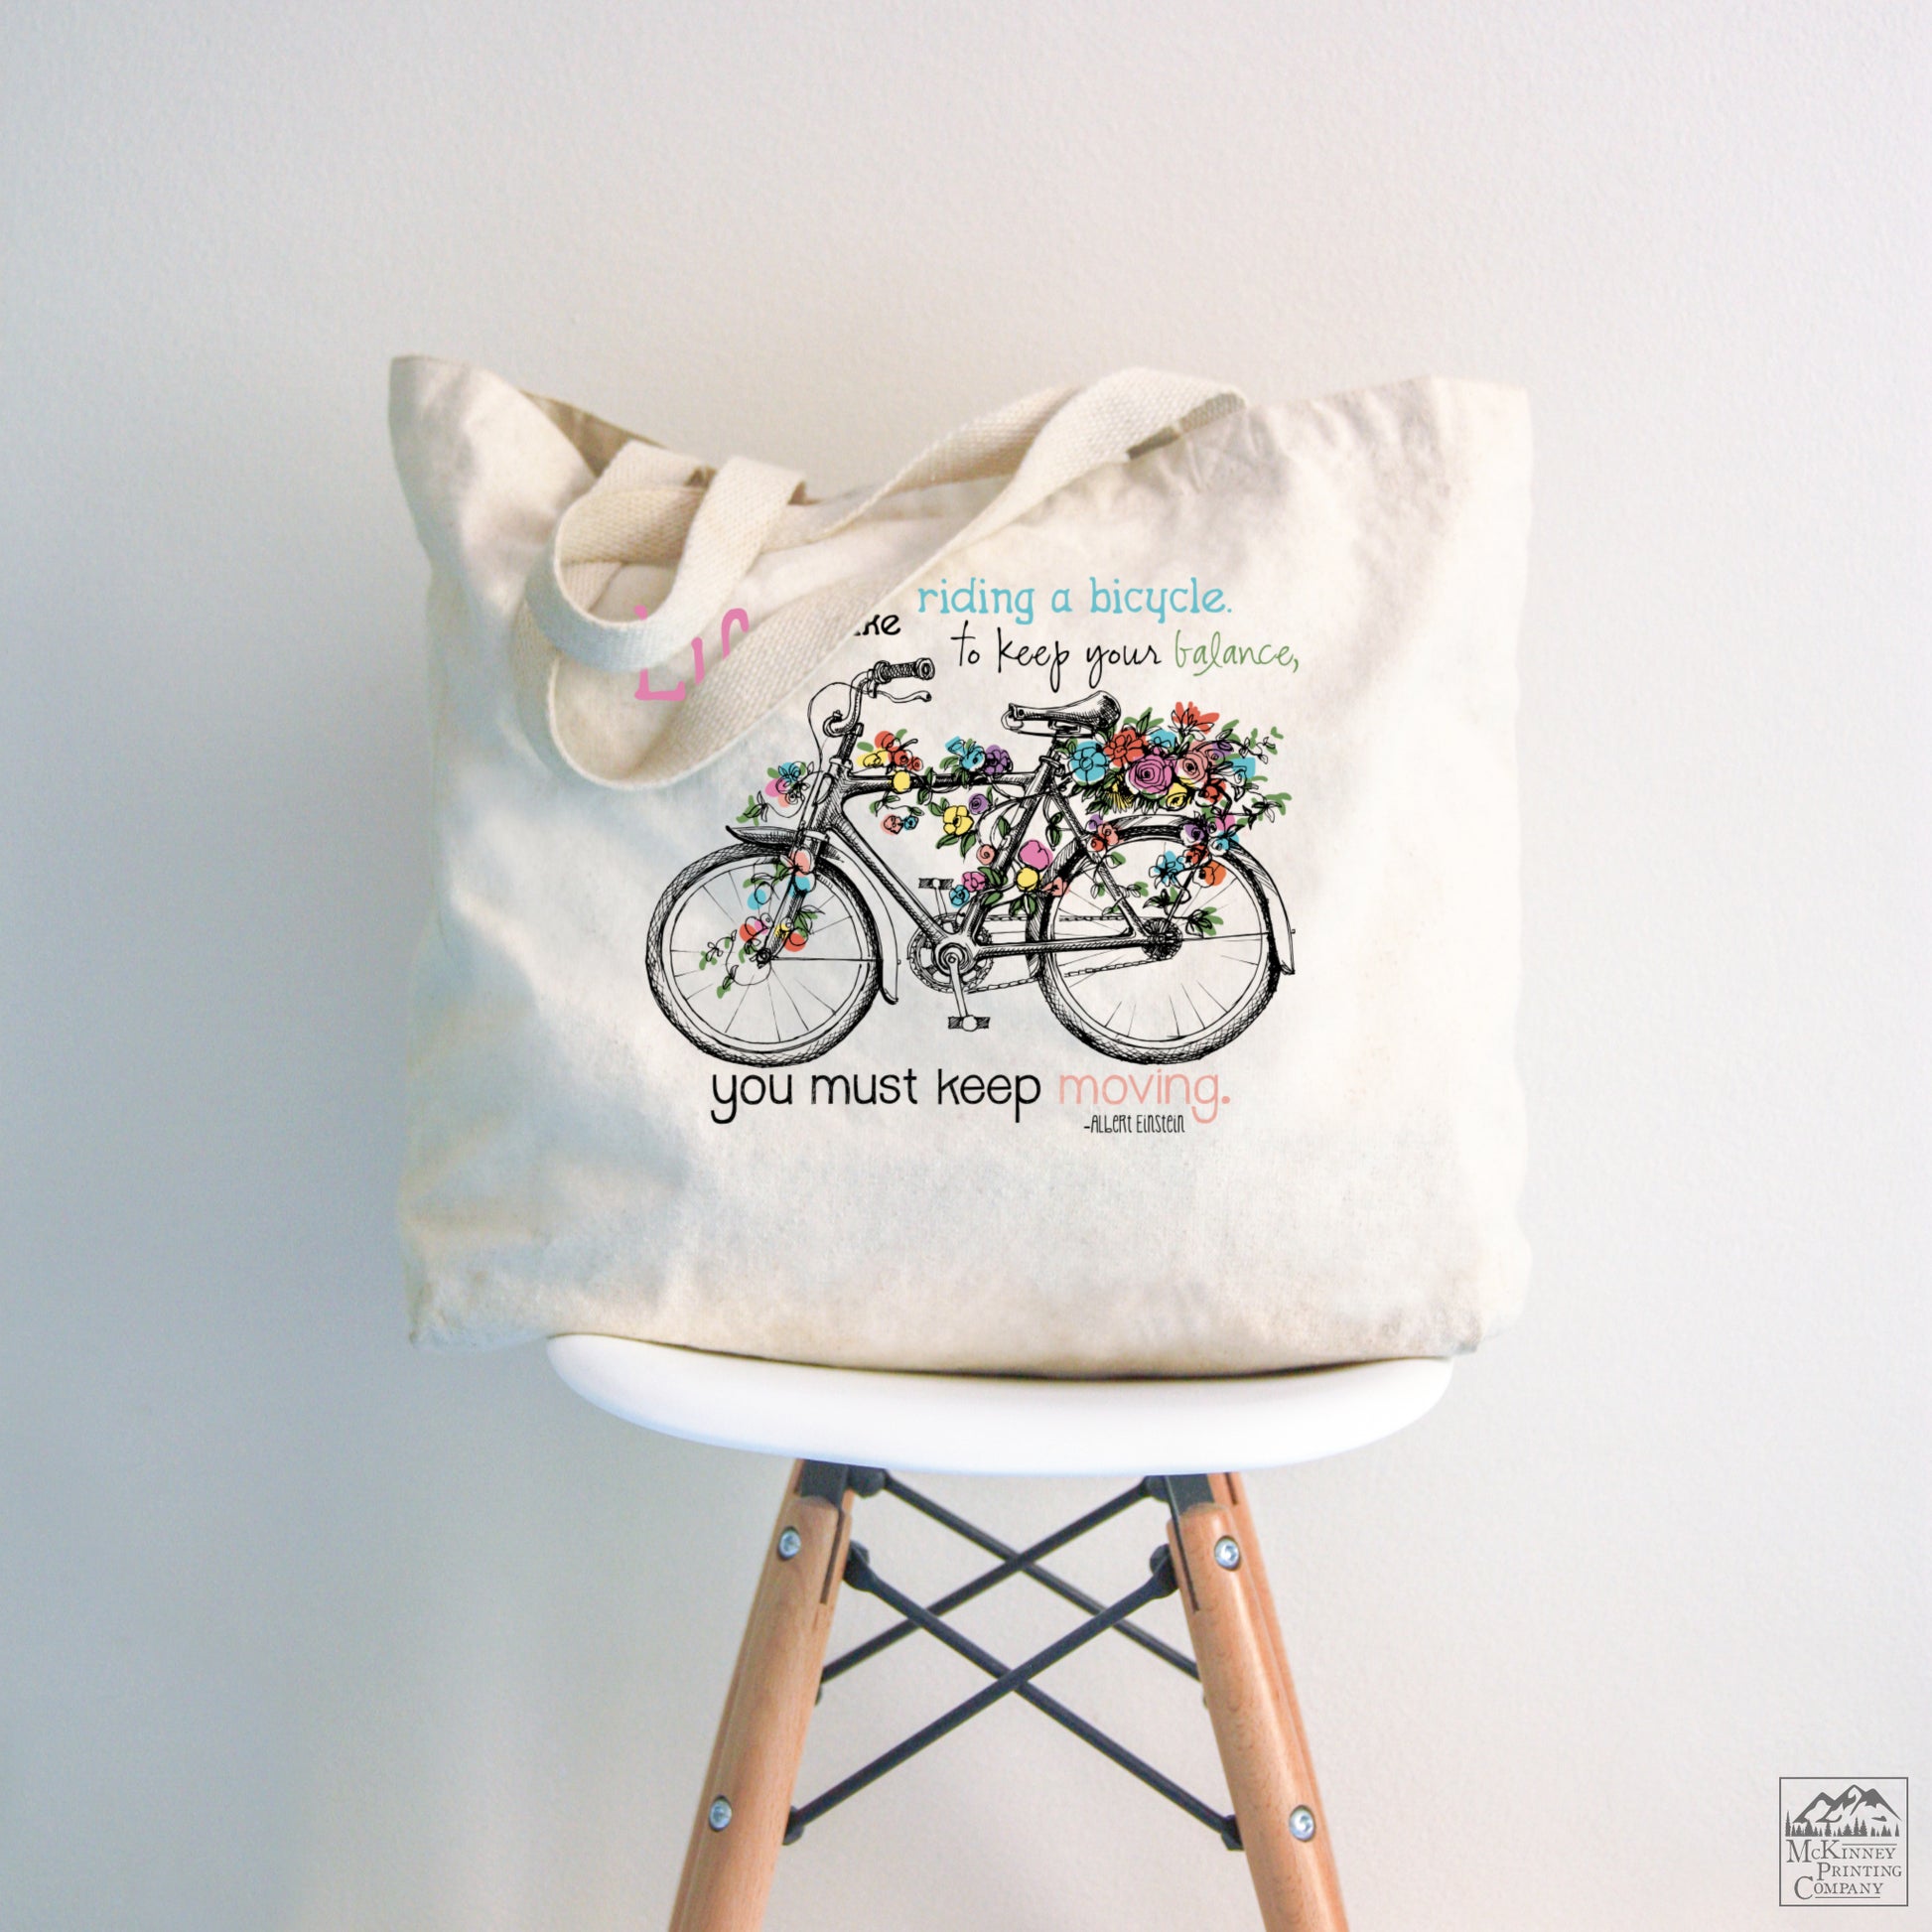 Everyday Tote Bag, Inspirational Quote - Life if like riding a bicycle. To Keep your balance, you must keep moving. Albert Einstein